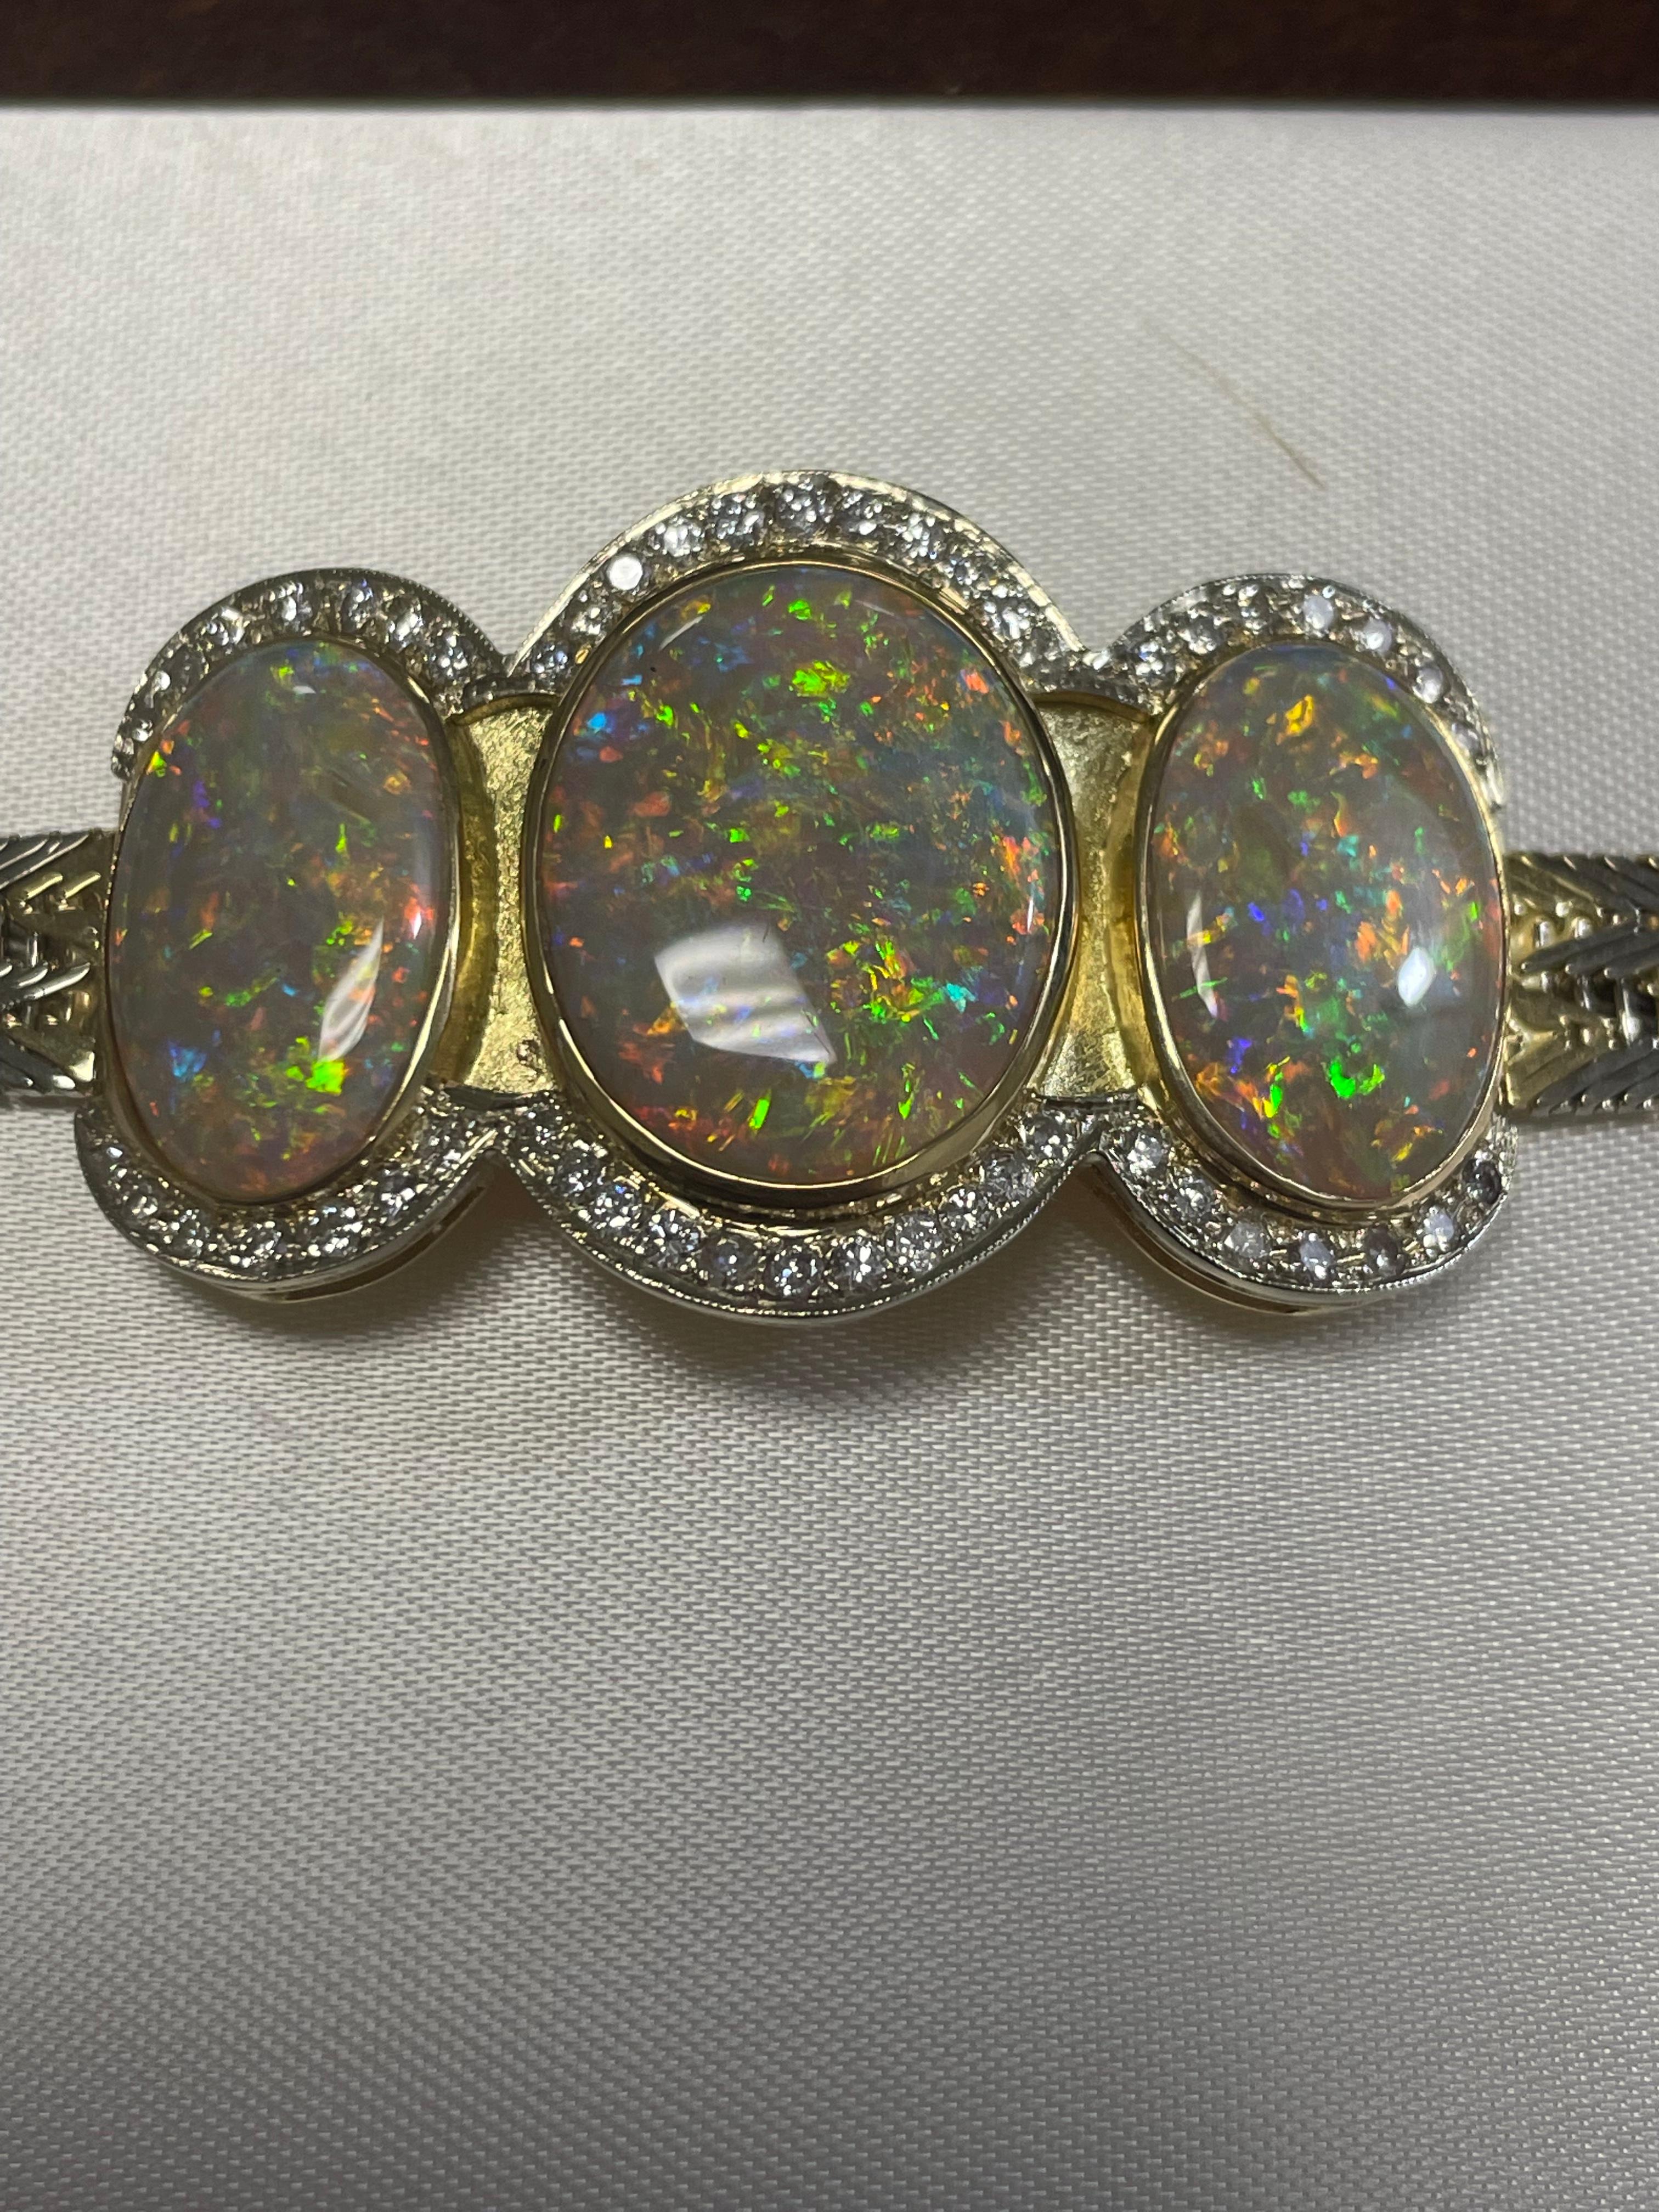 One lady's semi-black opal with multi color fire color.  Saturation scale is average with a pin fire pattern.  Bright, cabochon, oval shape.  Measurements are (1) 20.0 x 15.5 mm (2) 18.0 x 12.0 mm.  50 round brilliant cut diamonds measuring 1.7 mm. 